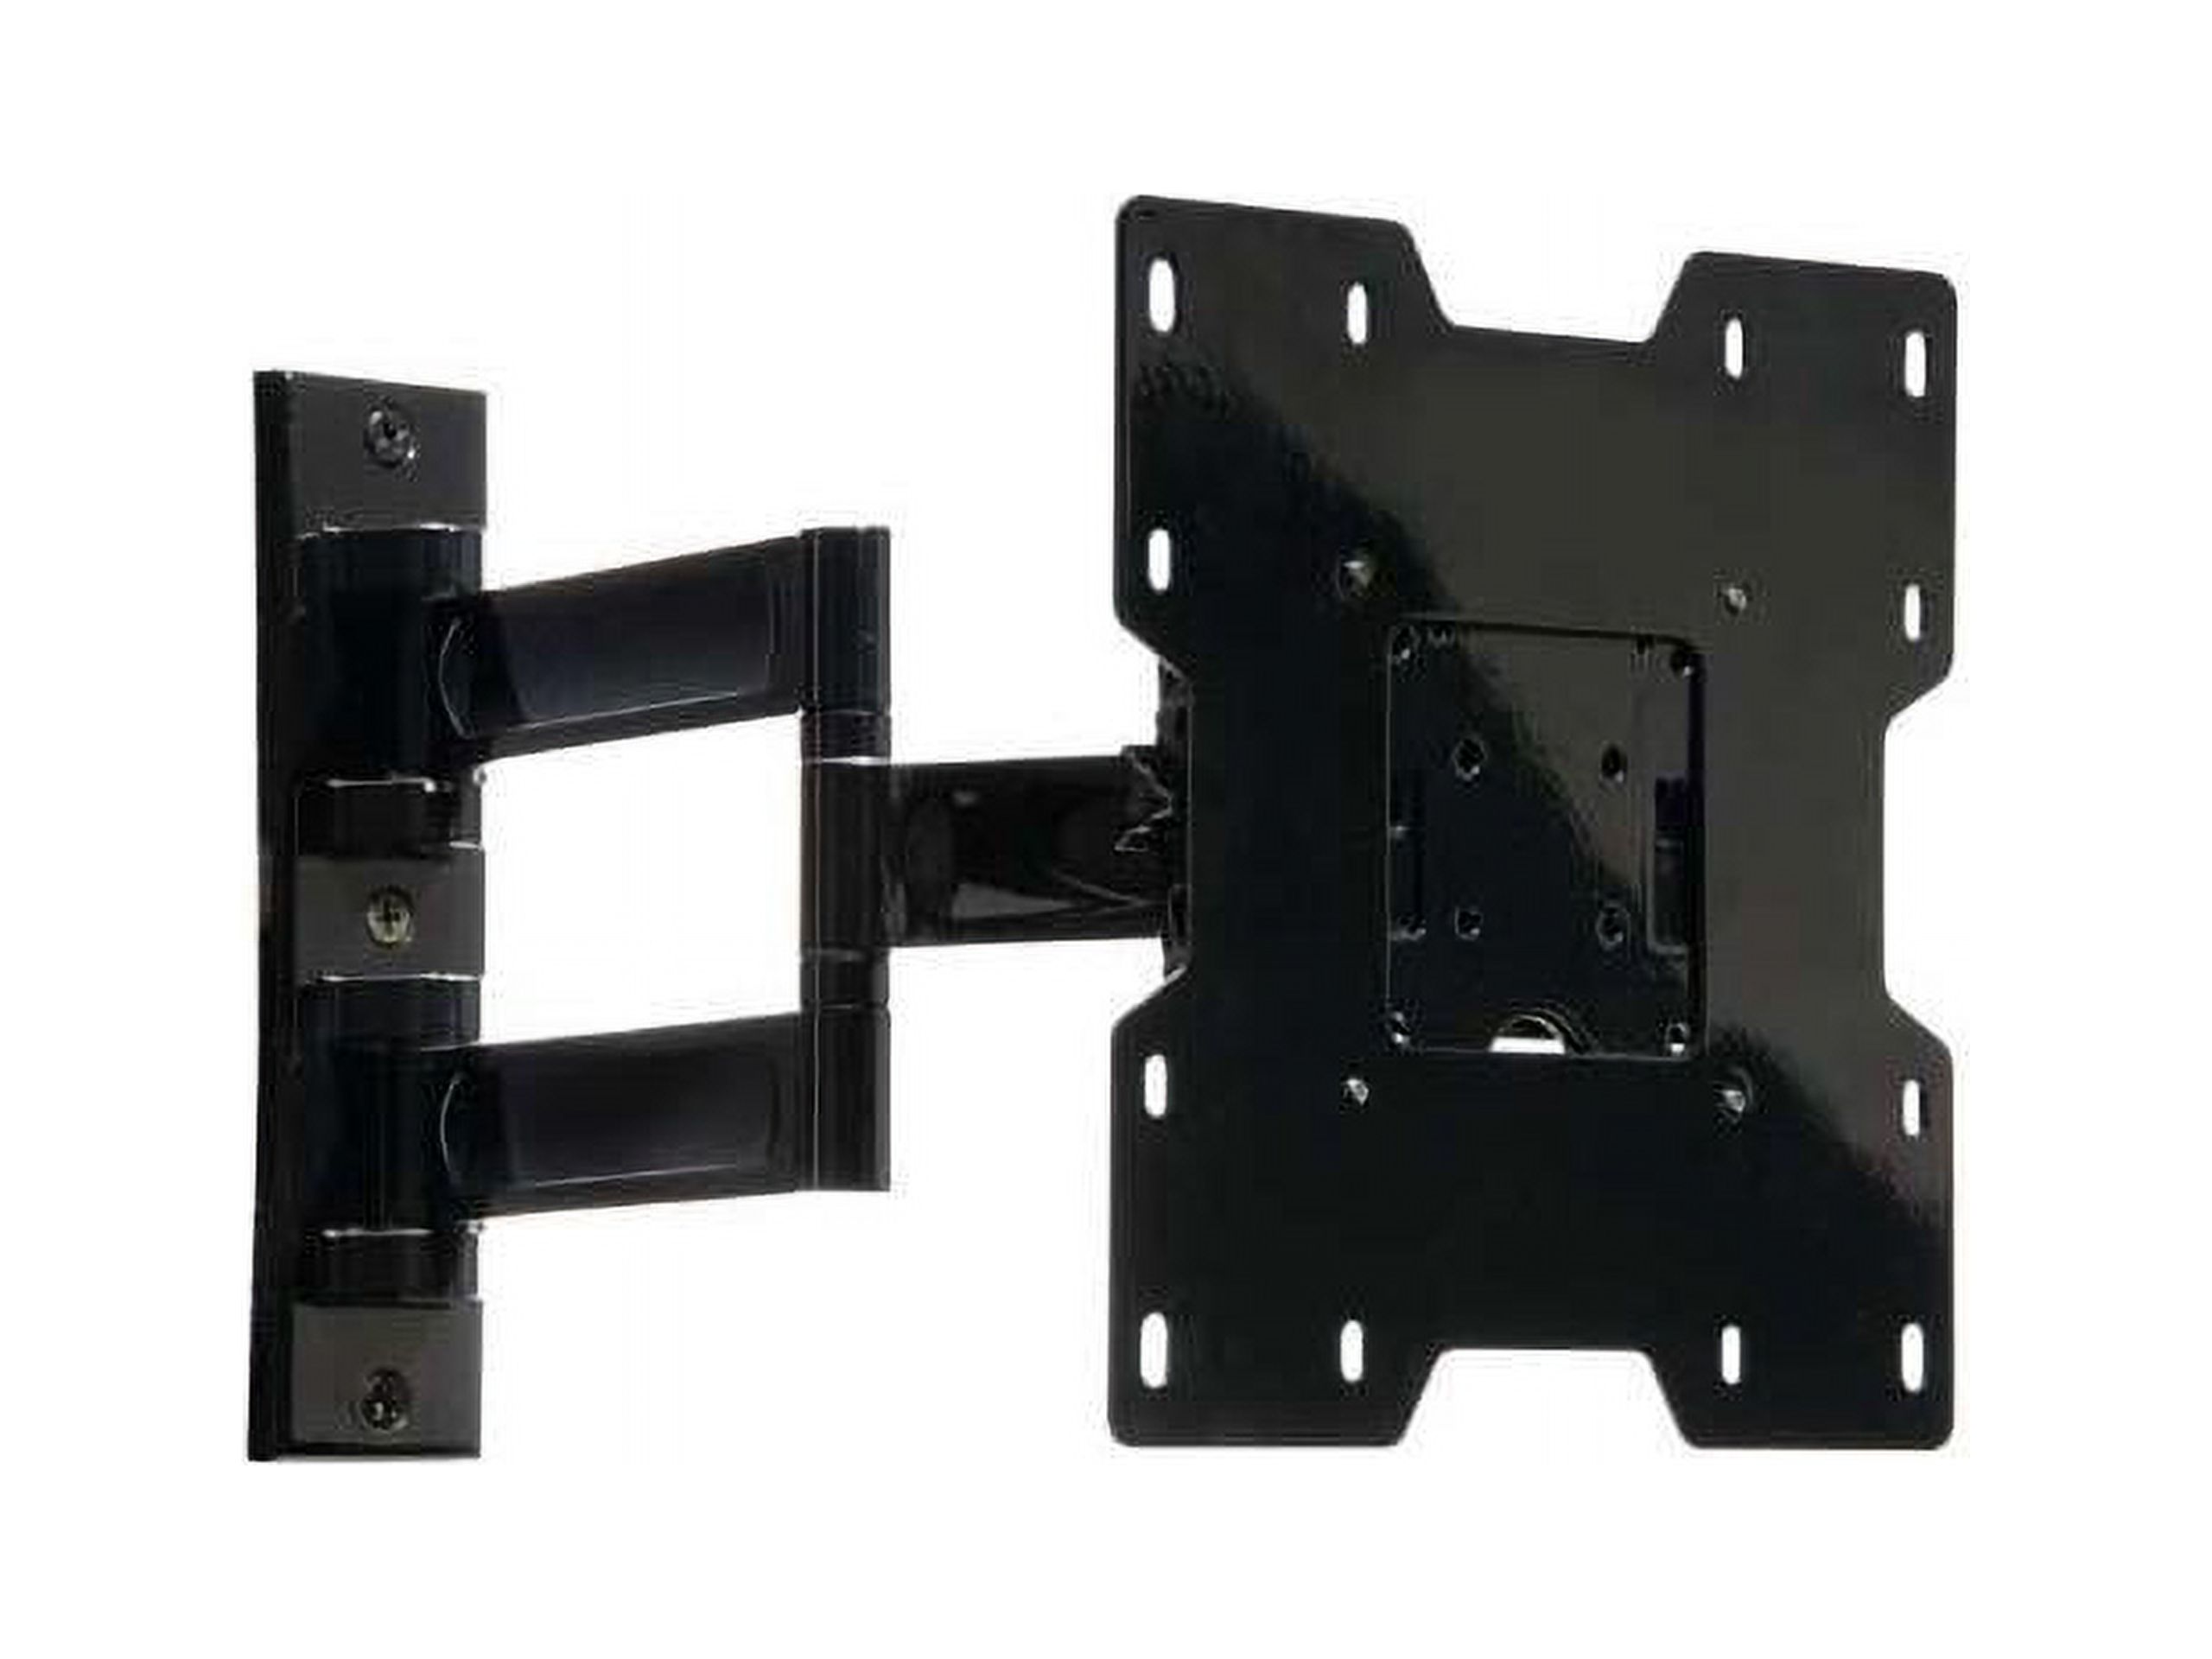 Peerless PA740 22"-40" Articulating TV Wall Mount LED & LCD HDTV Up to VESA 200x200mm Max Load 80 lbs., Compatible with Samsung, Vizio, Sony, Panasonic, LG, and Toshiba TV - image 1 of 2